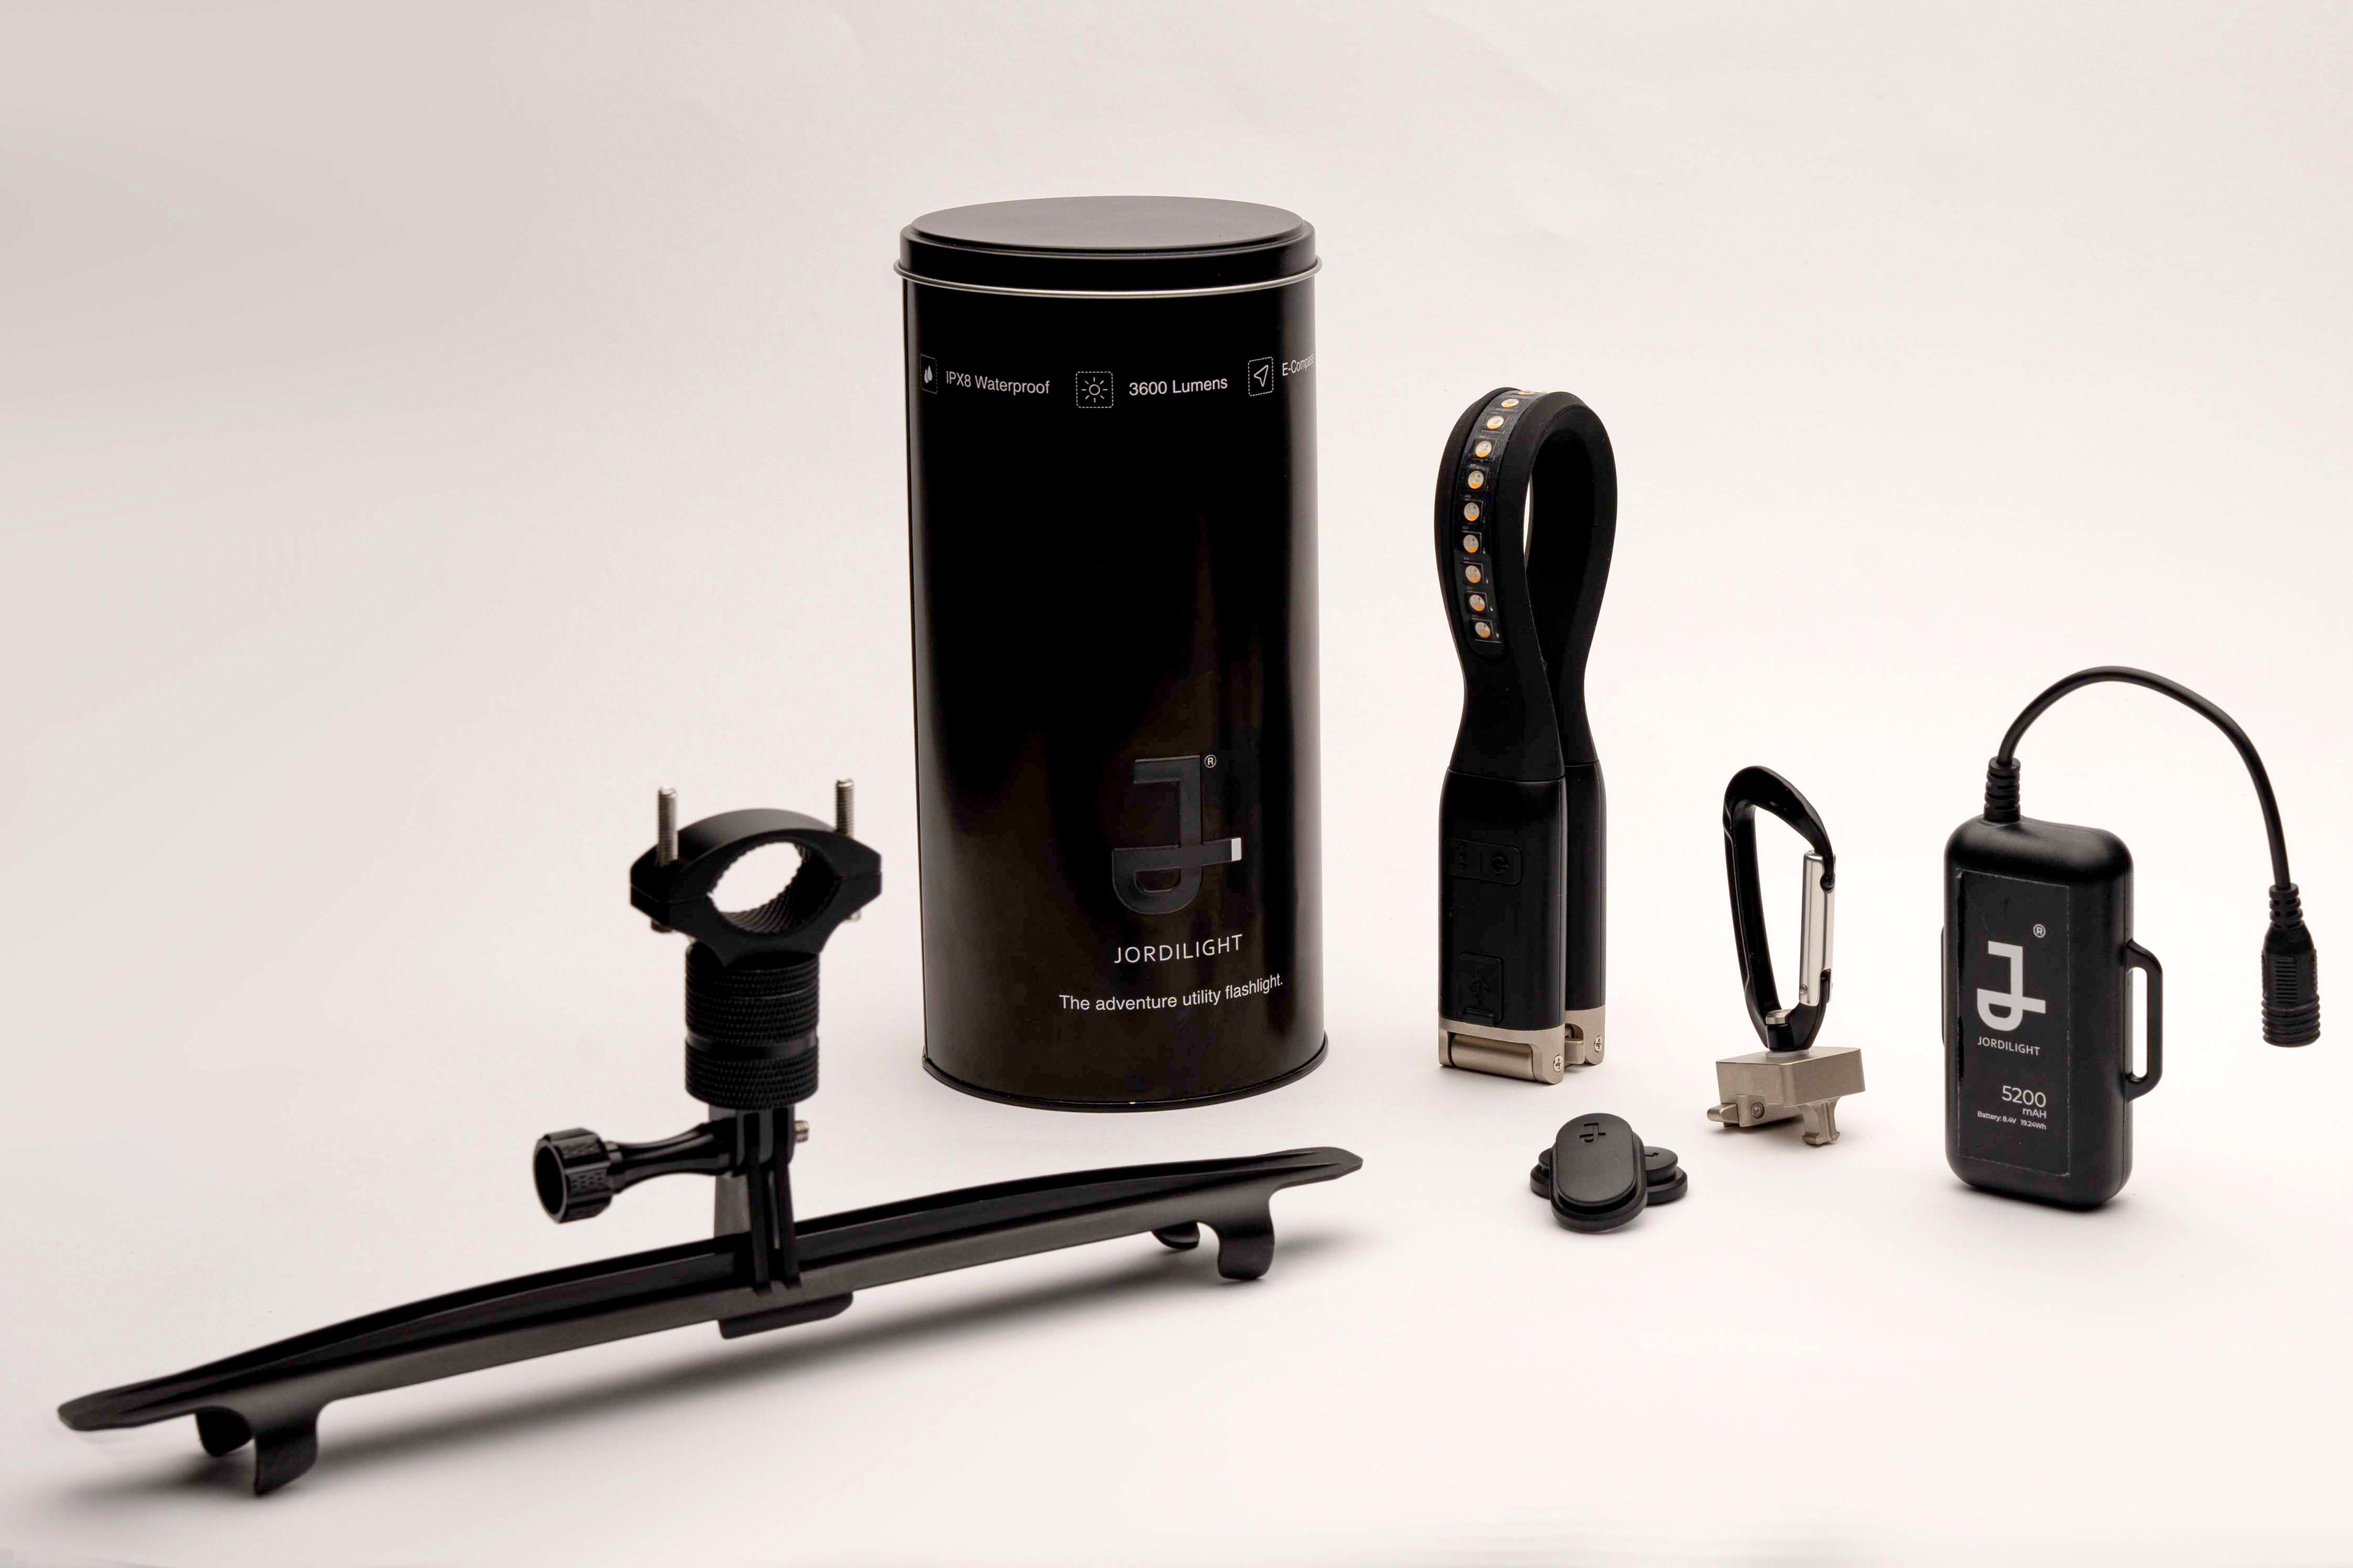 JordiLight Ultimate Kit displayed with all accessories, including portable charger, helmet attachment kit, handle bar attachment kit, and carabiner clip, designed for versatile outdoor use.